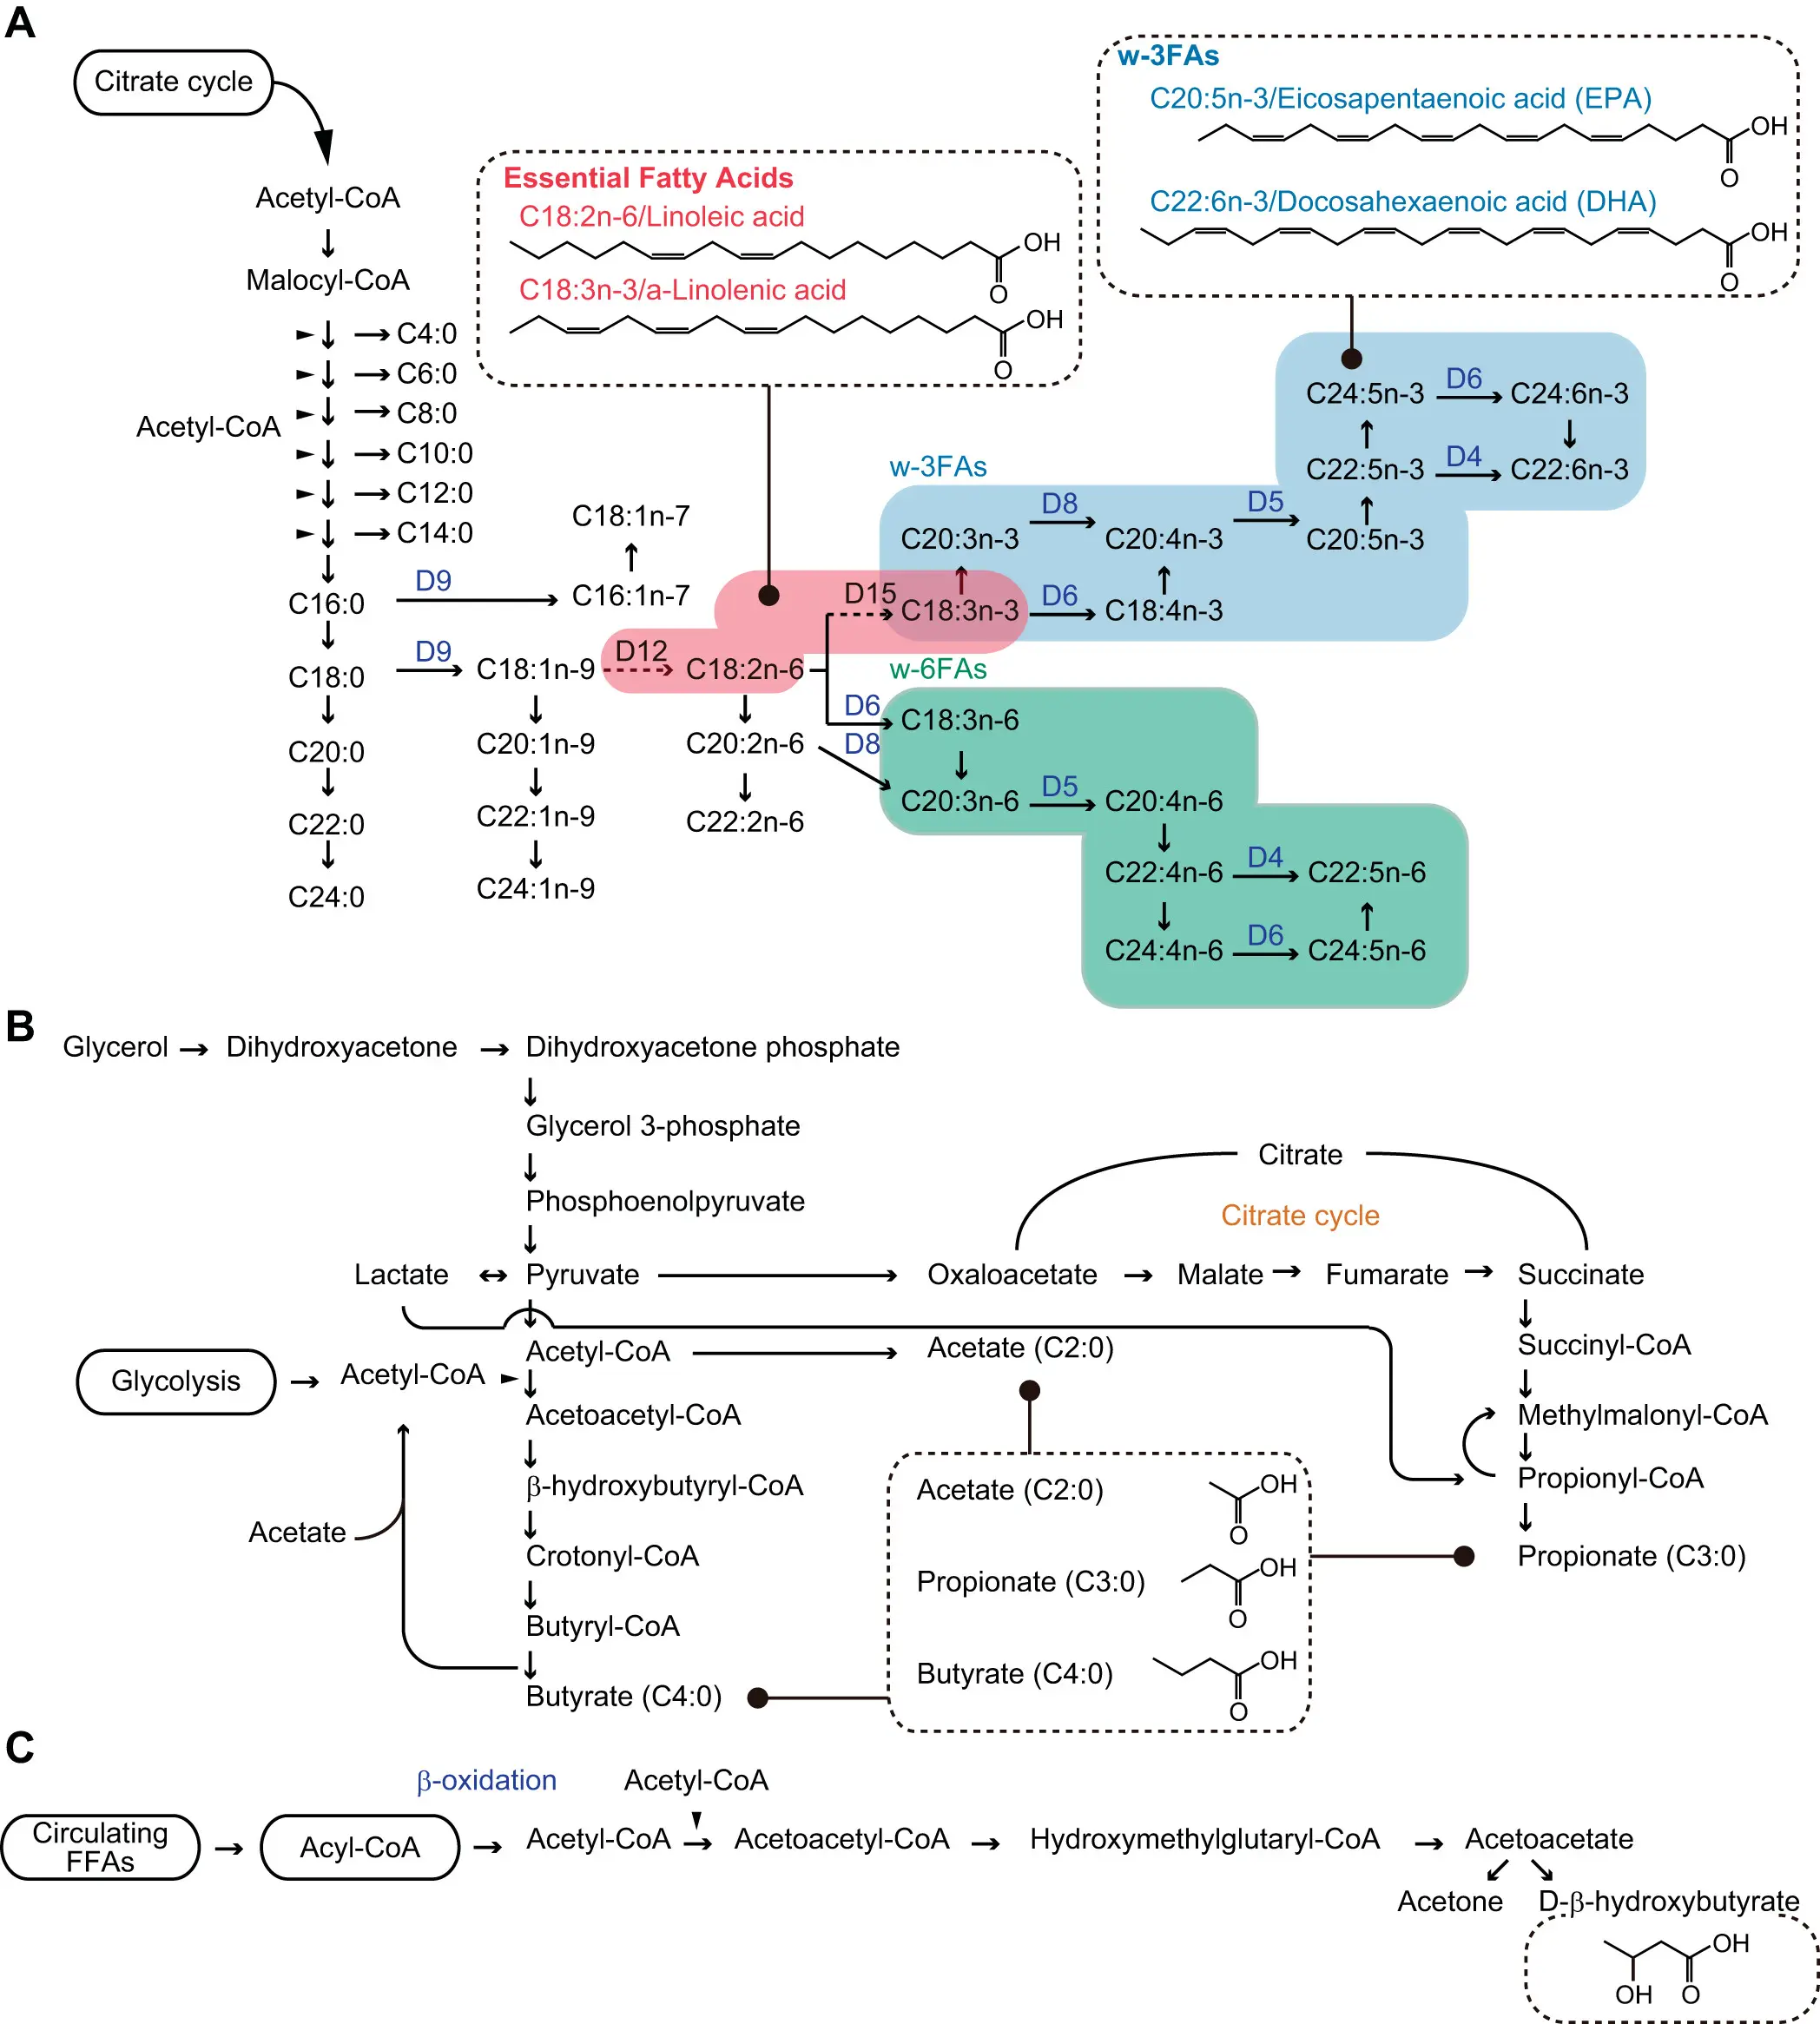 Fatty acids: its classification, synthesis pathways and related diseases